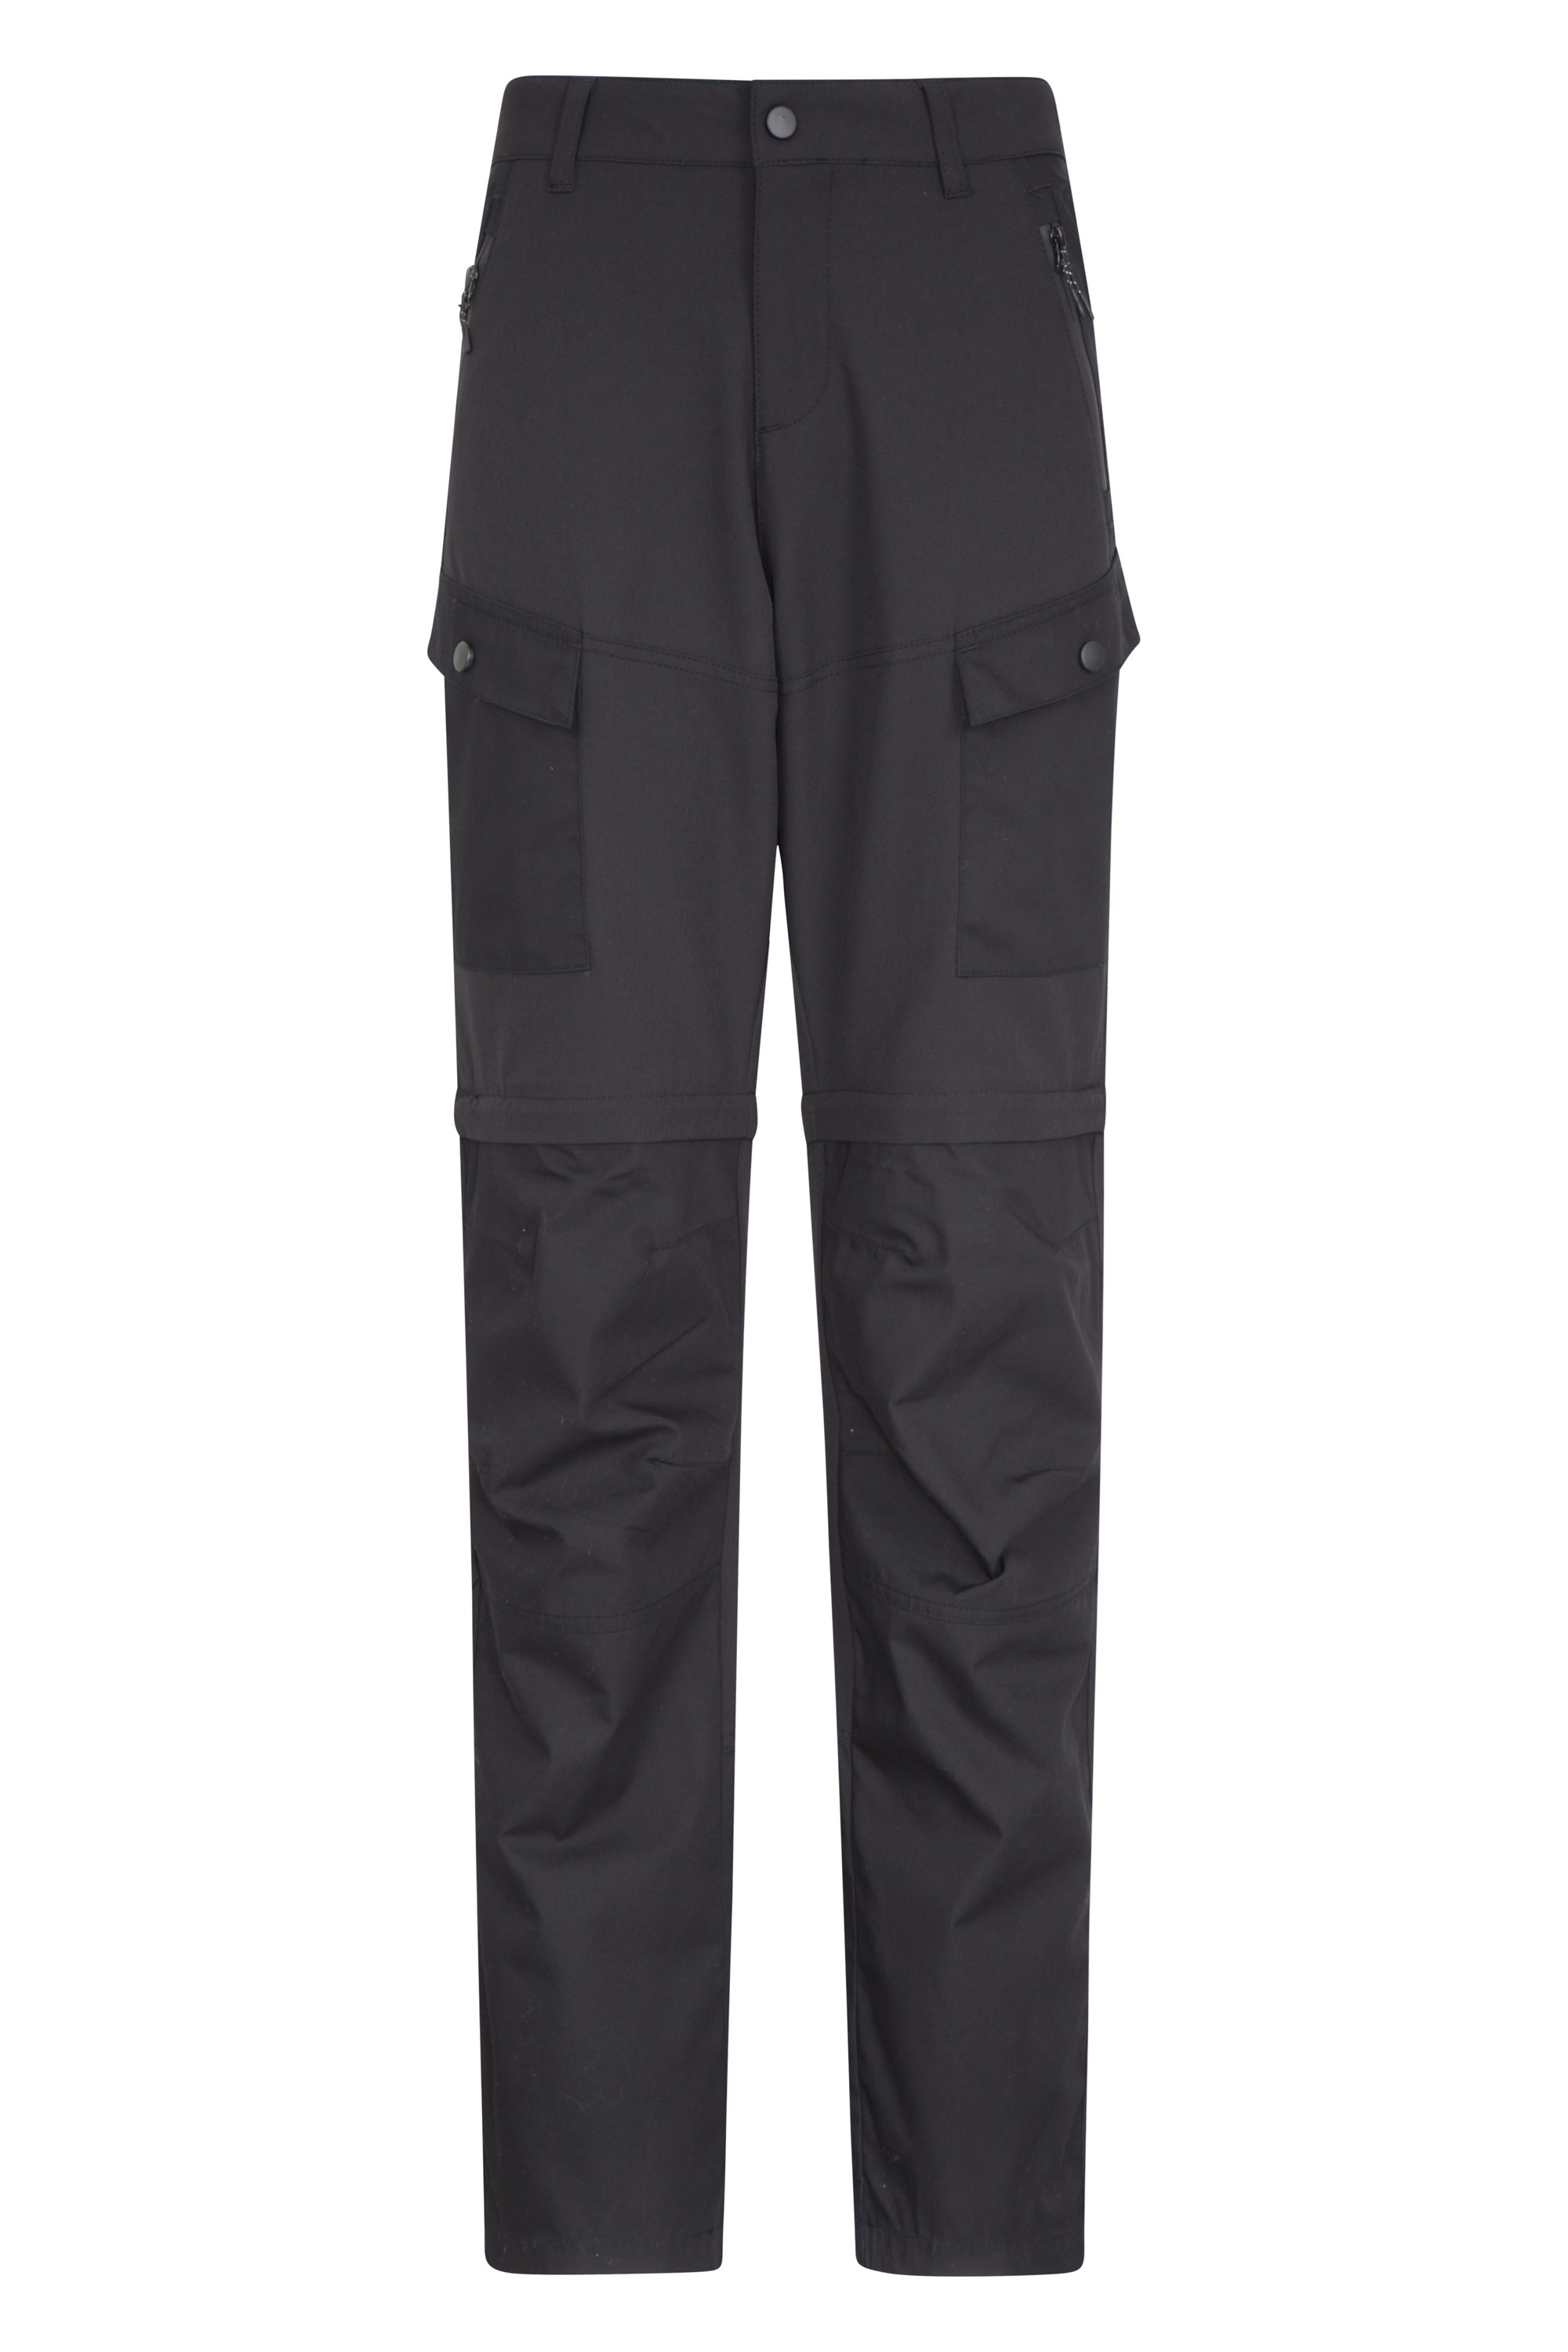 Mountain Warehouse Mens Forest Water Resistant Hiking Trousers (Black) -  MW1314 | Catch.com.au